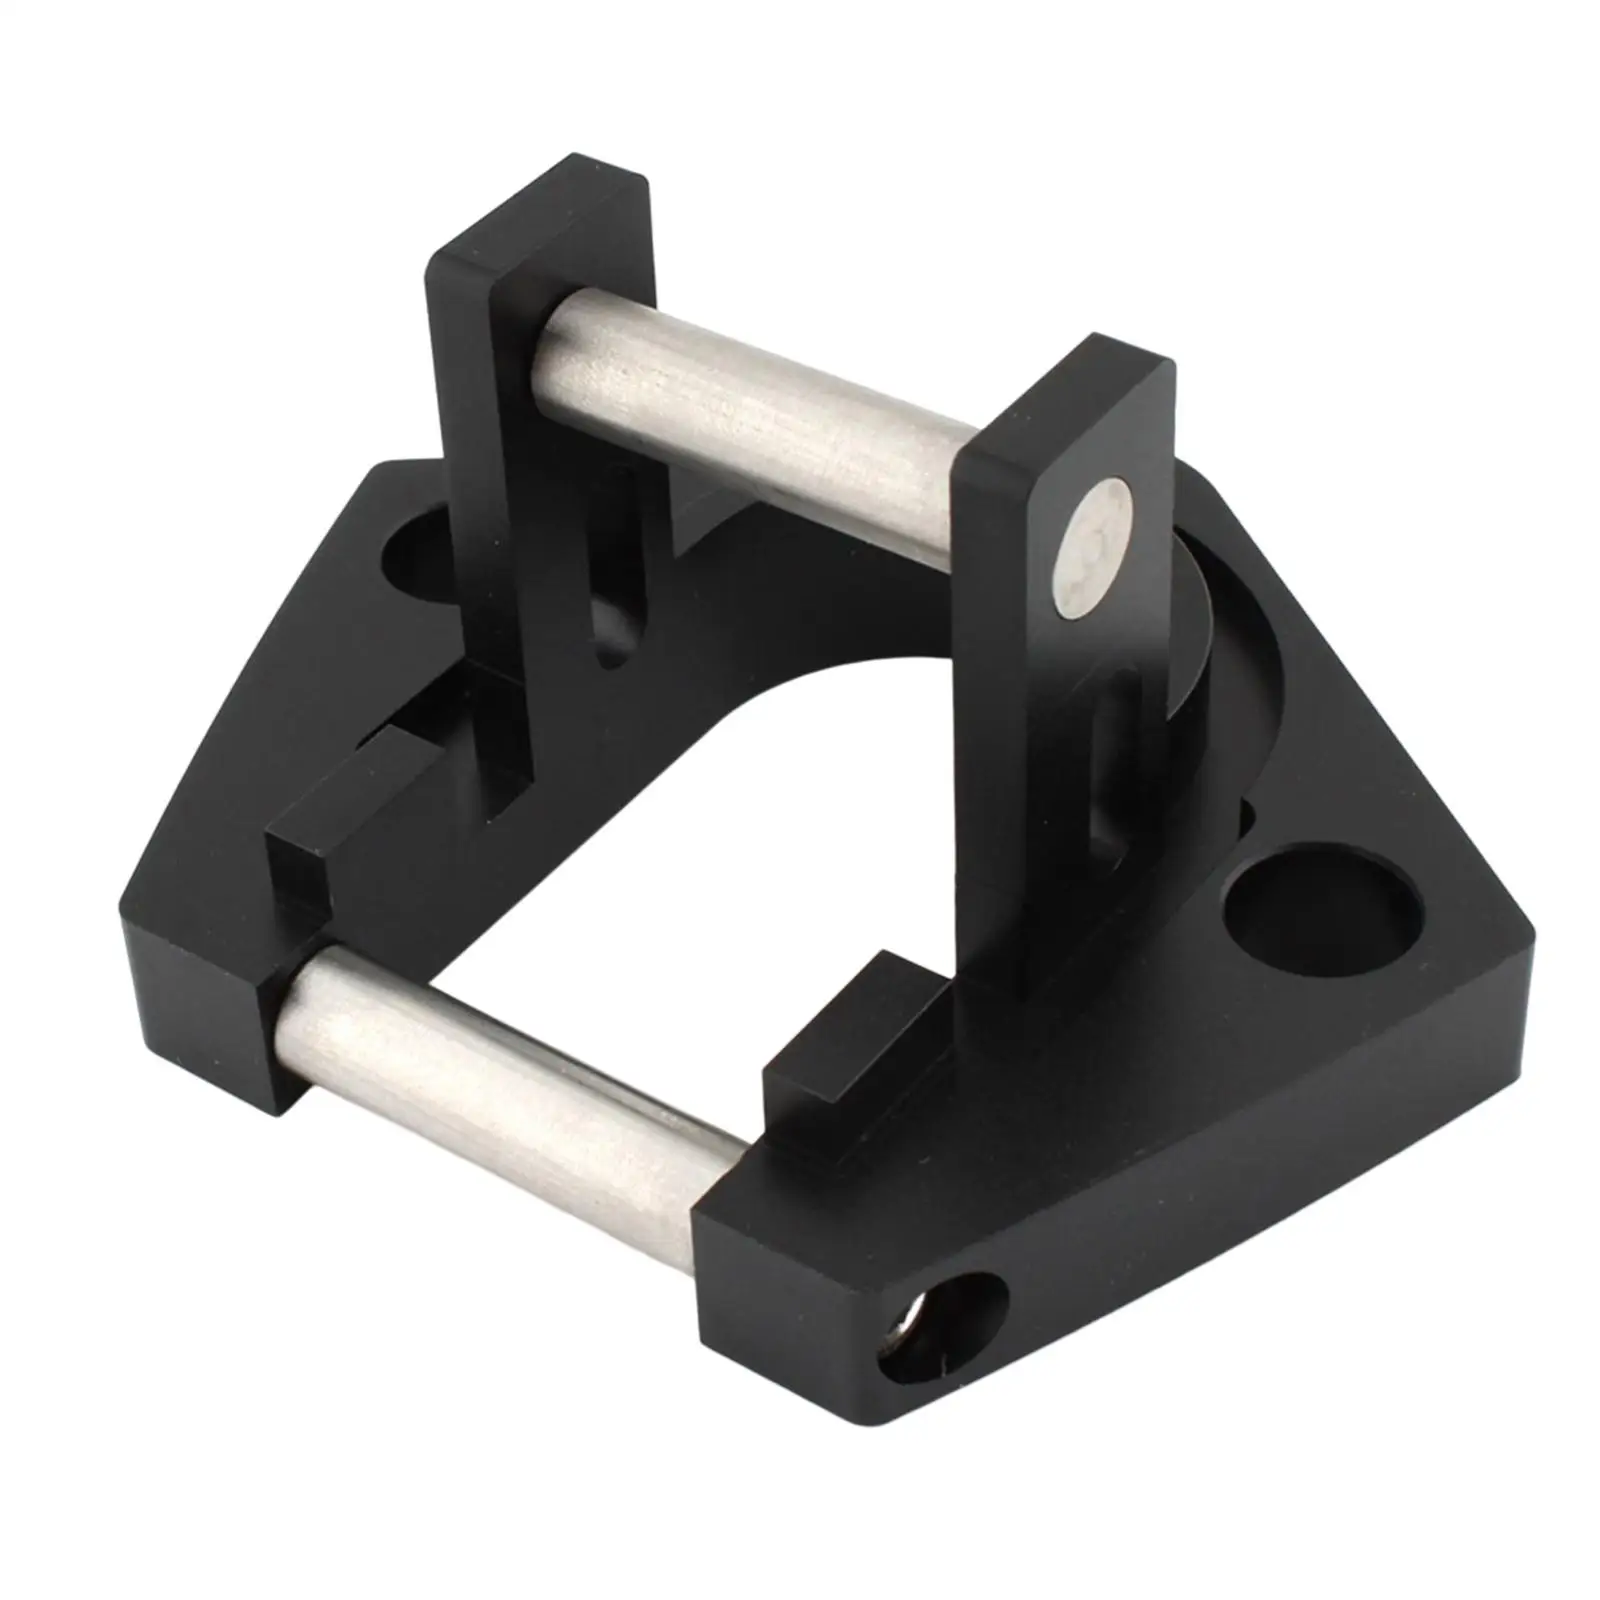 Bottom Mounting Bracket Foot Lightweight and Strong Aluminum Alloy Hardware Spare Parts